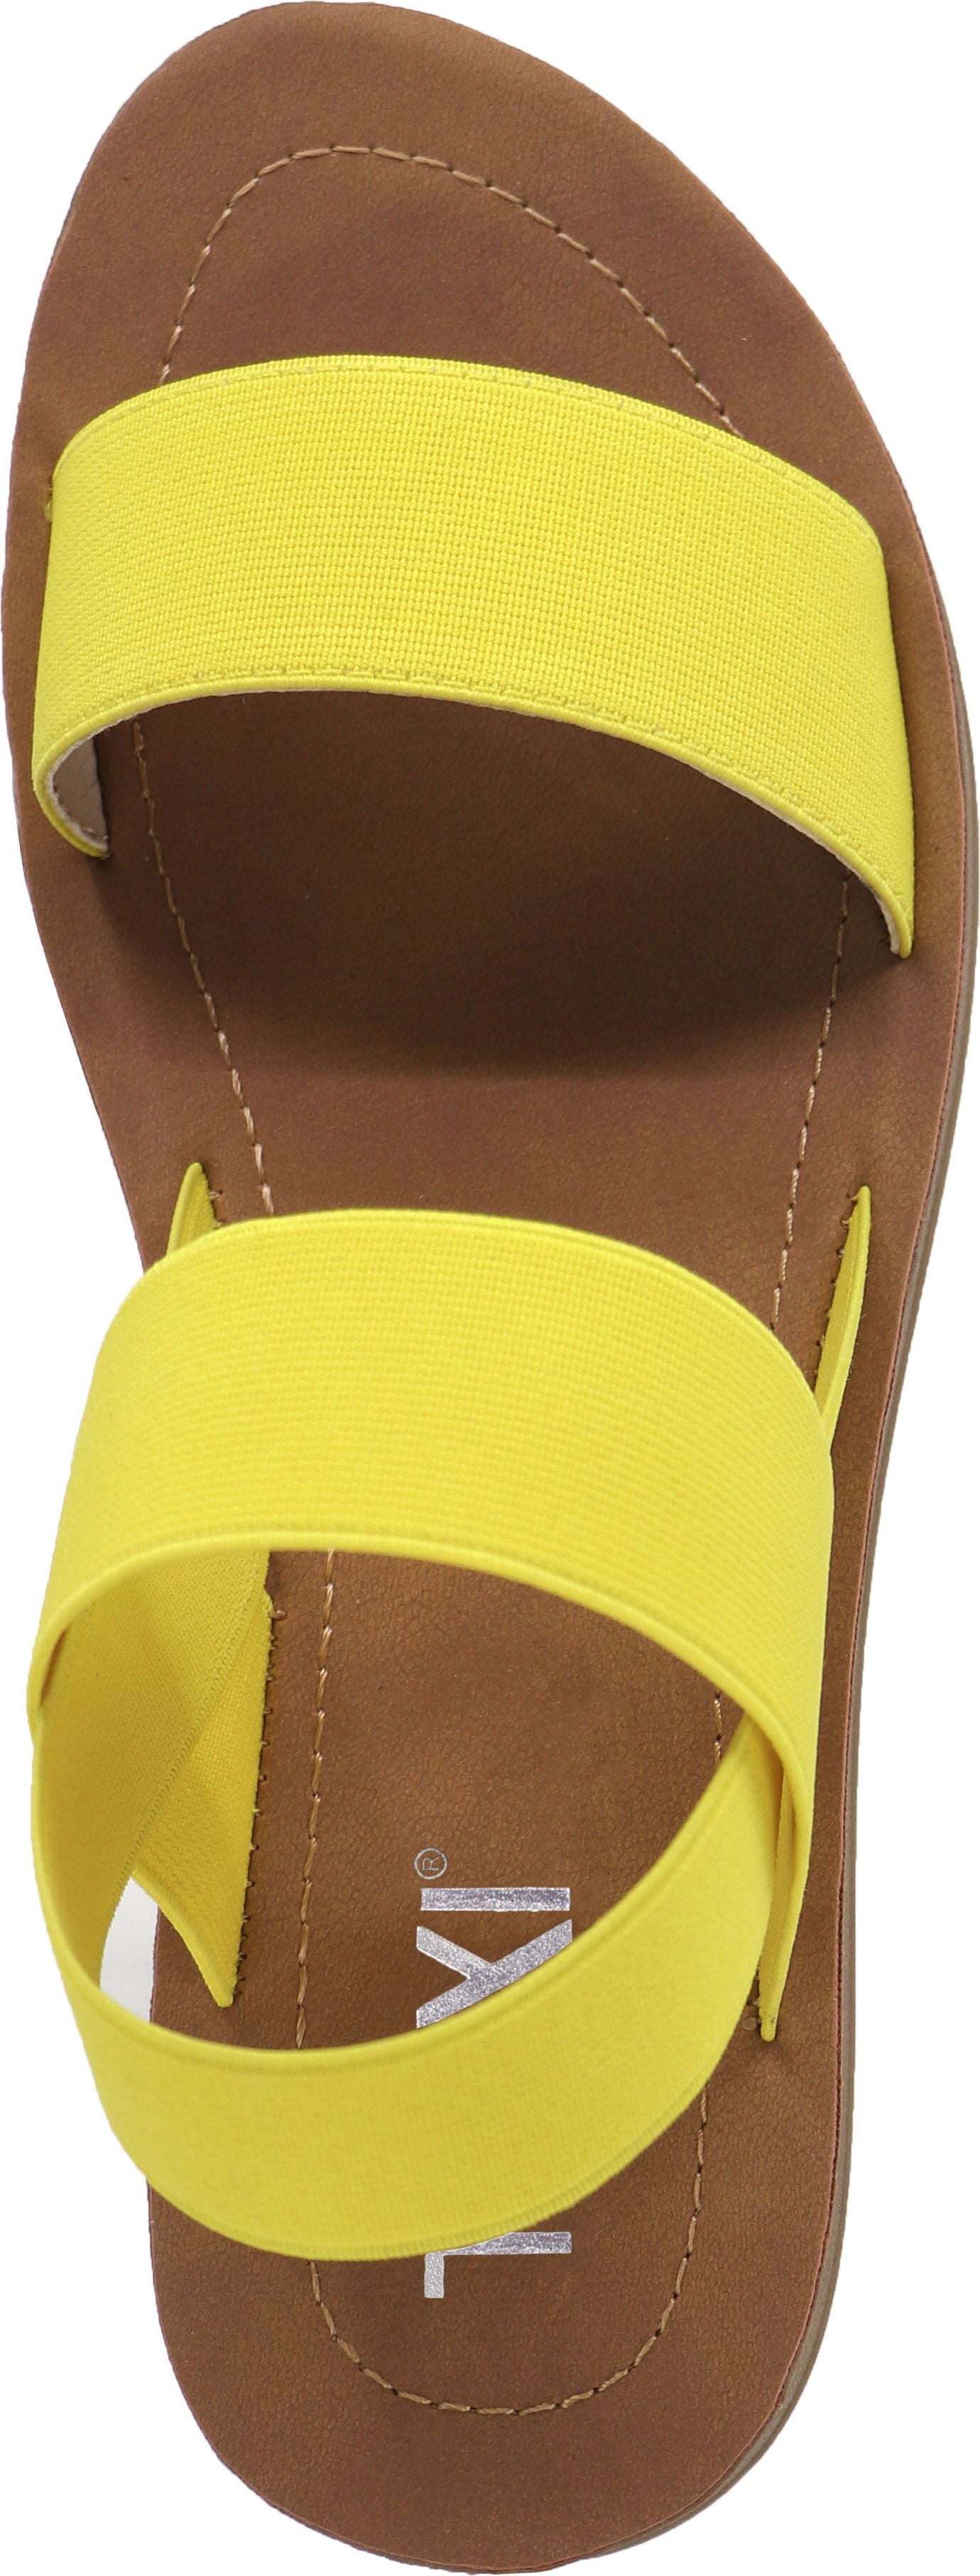 Taxi Sandals Remi02 Yellow